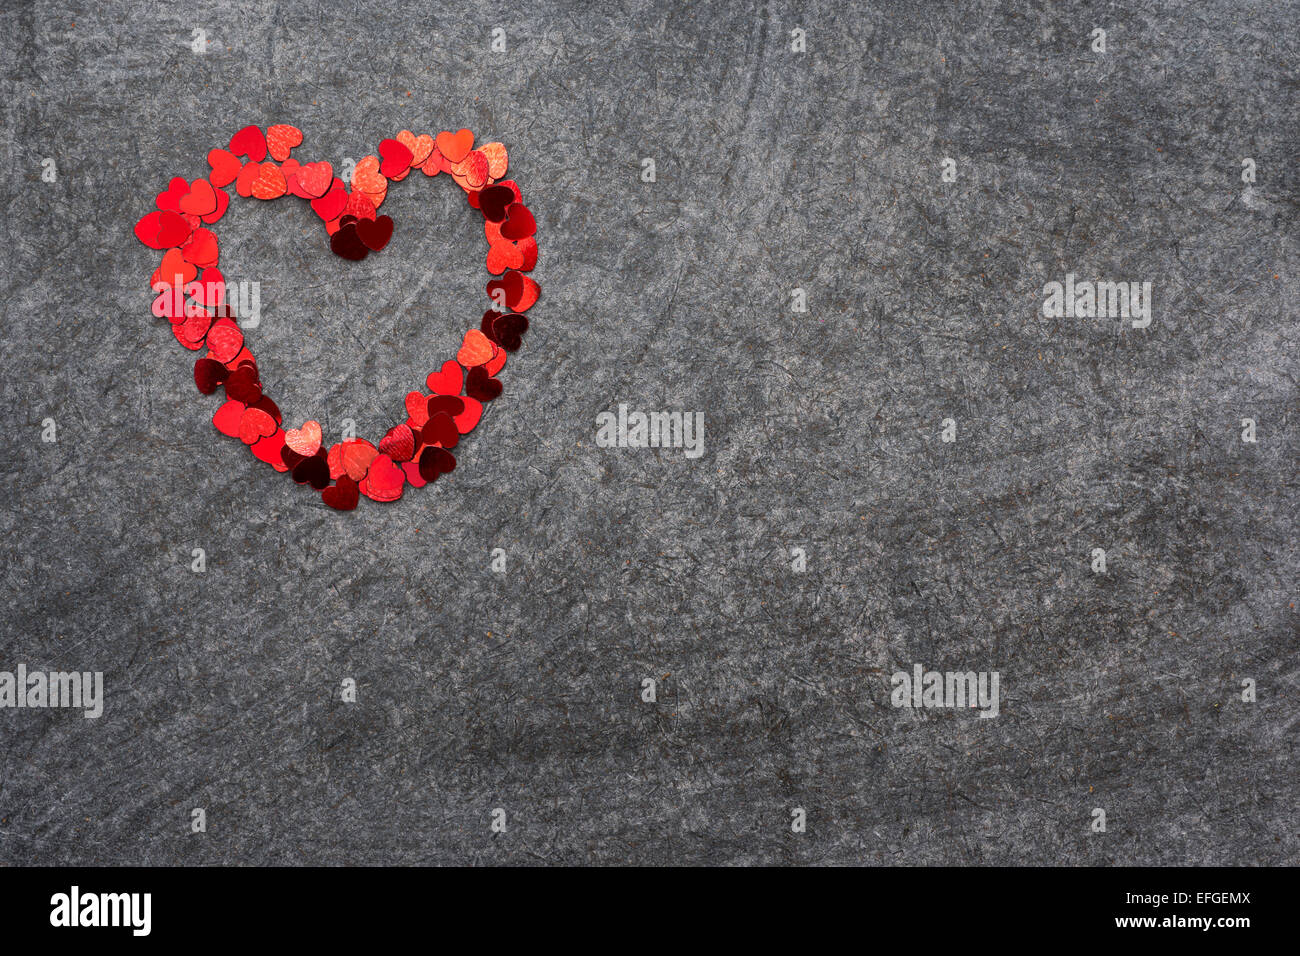 small red  heart figure made from many confetti pieces on blank blackboard Stock Photo